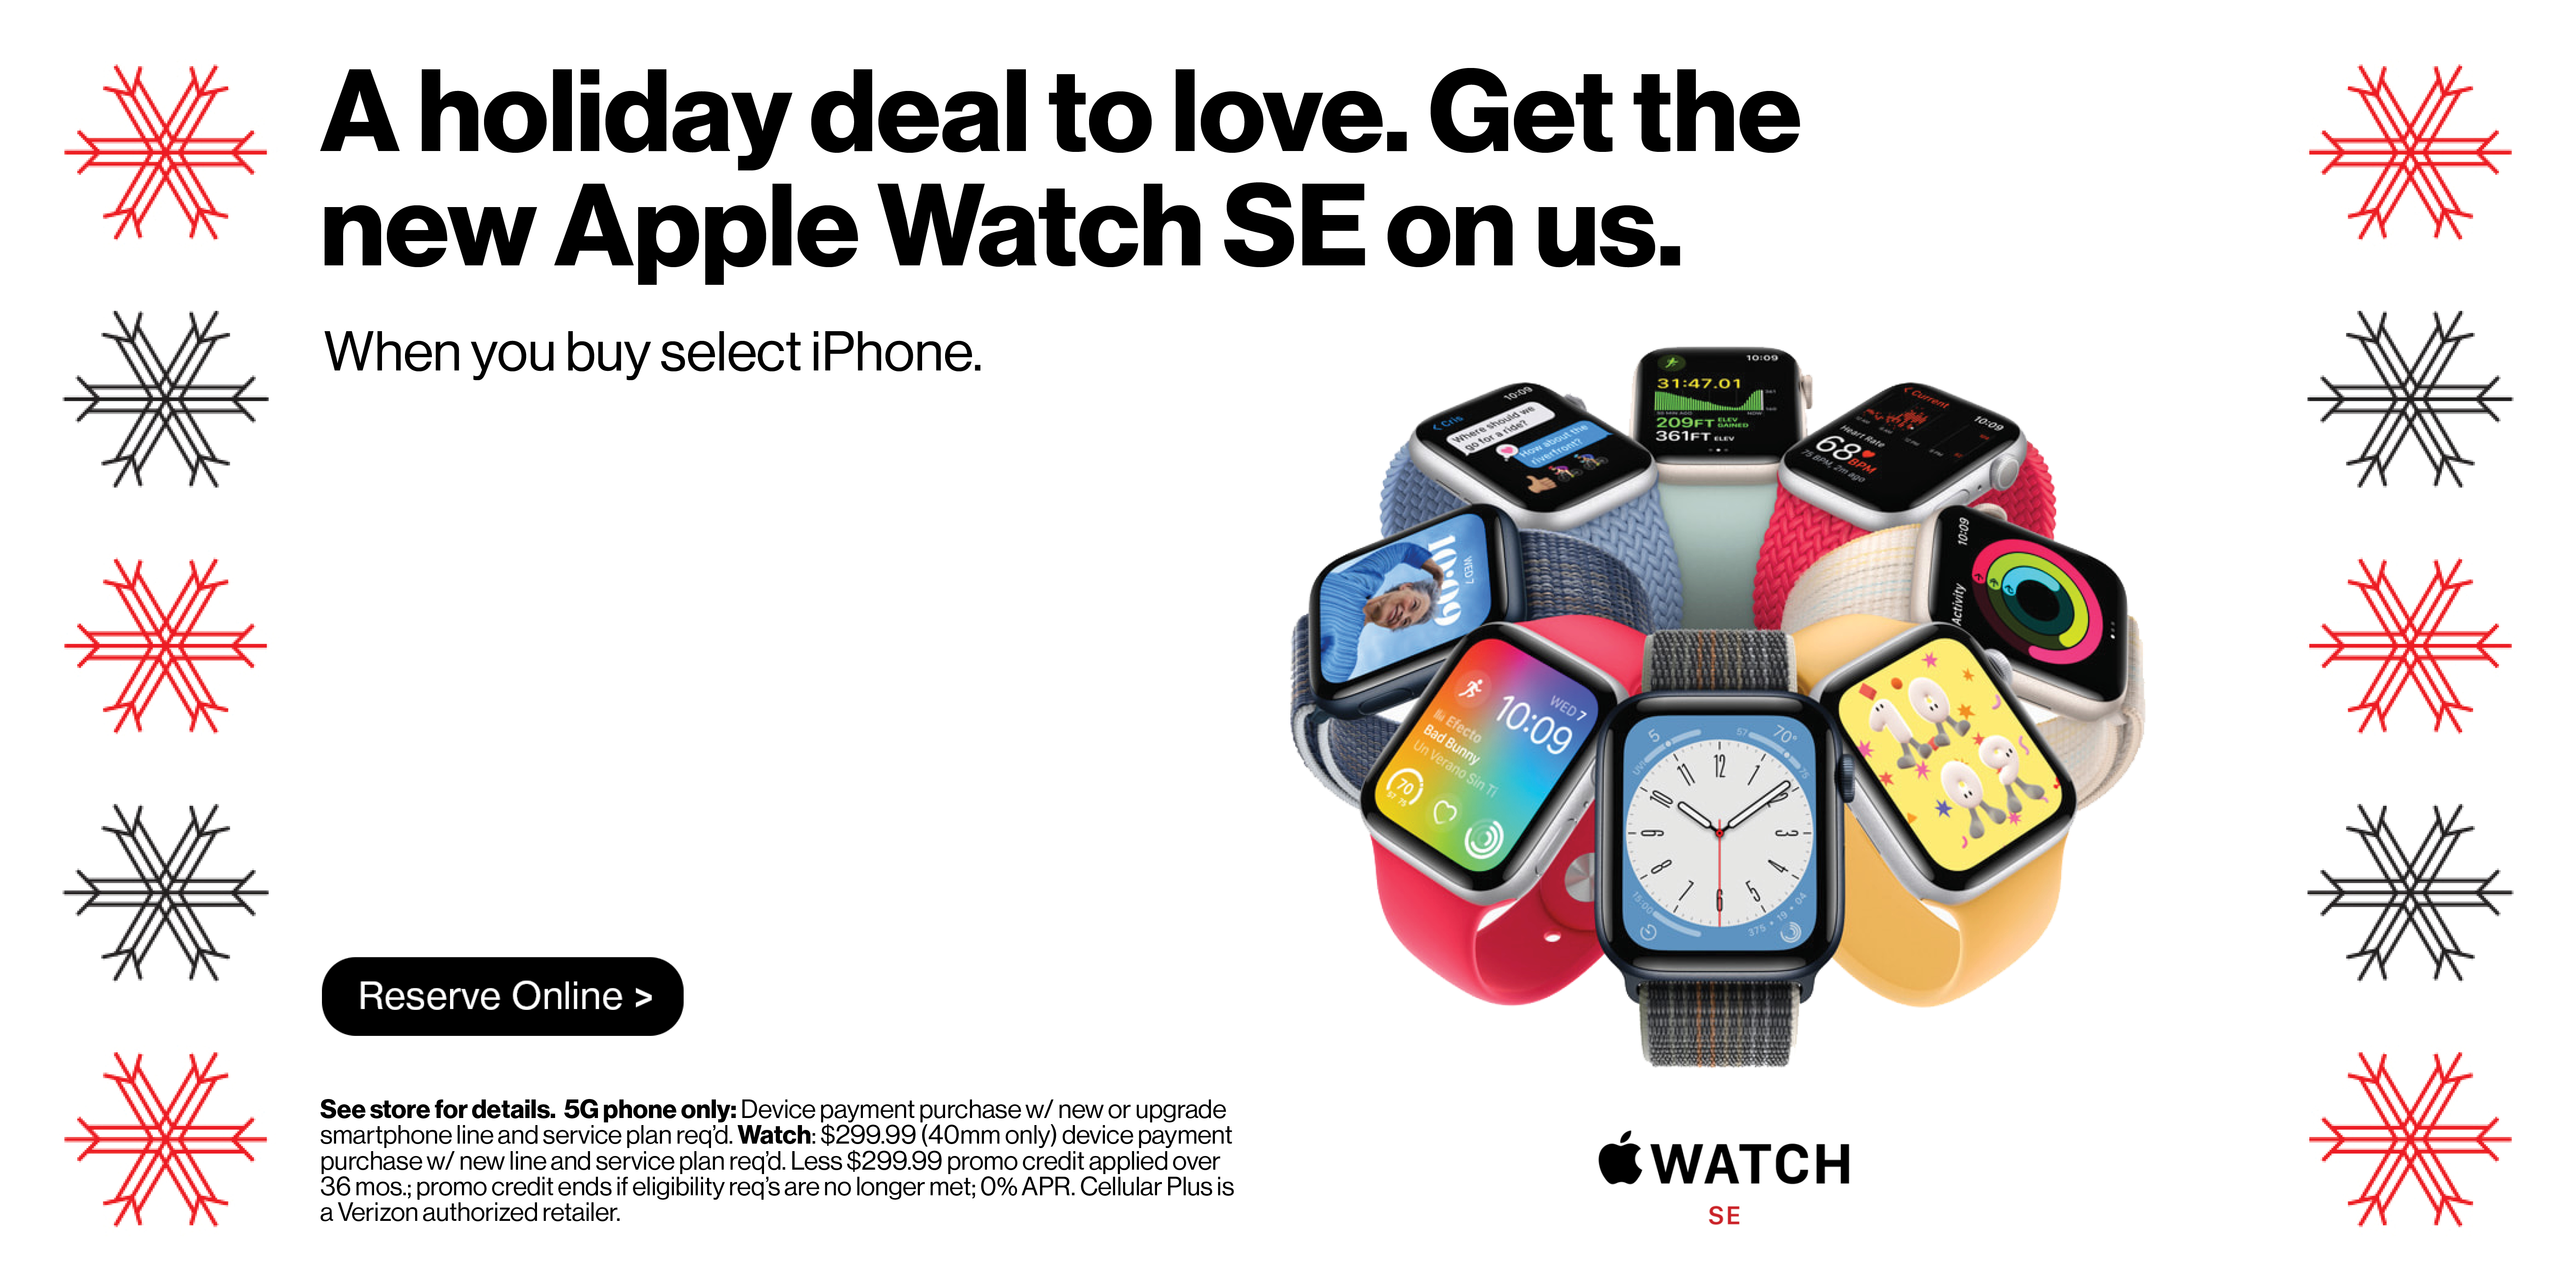 Get the Apple Watch SE free with any 5G iPhone purchase.